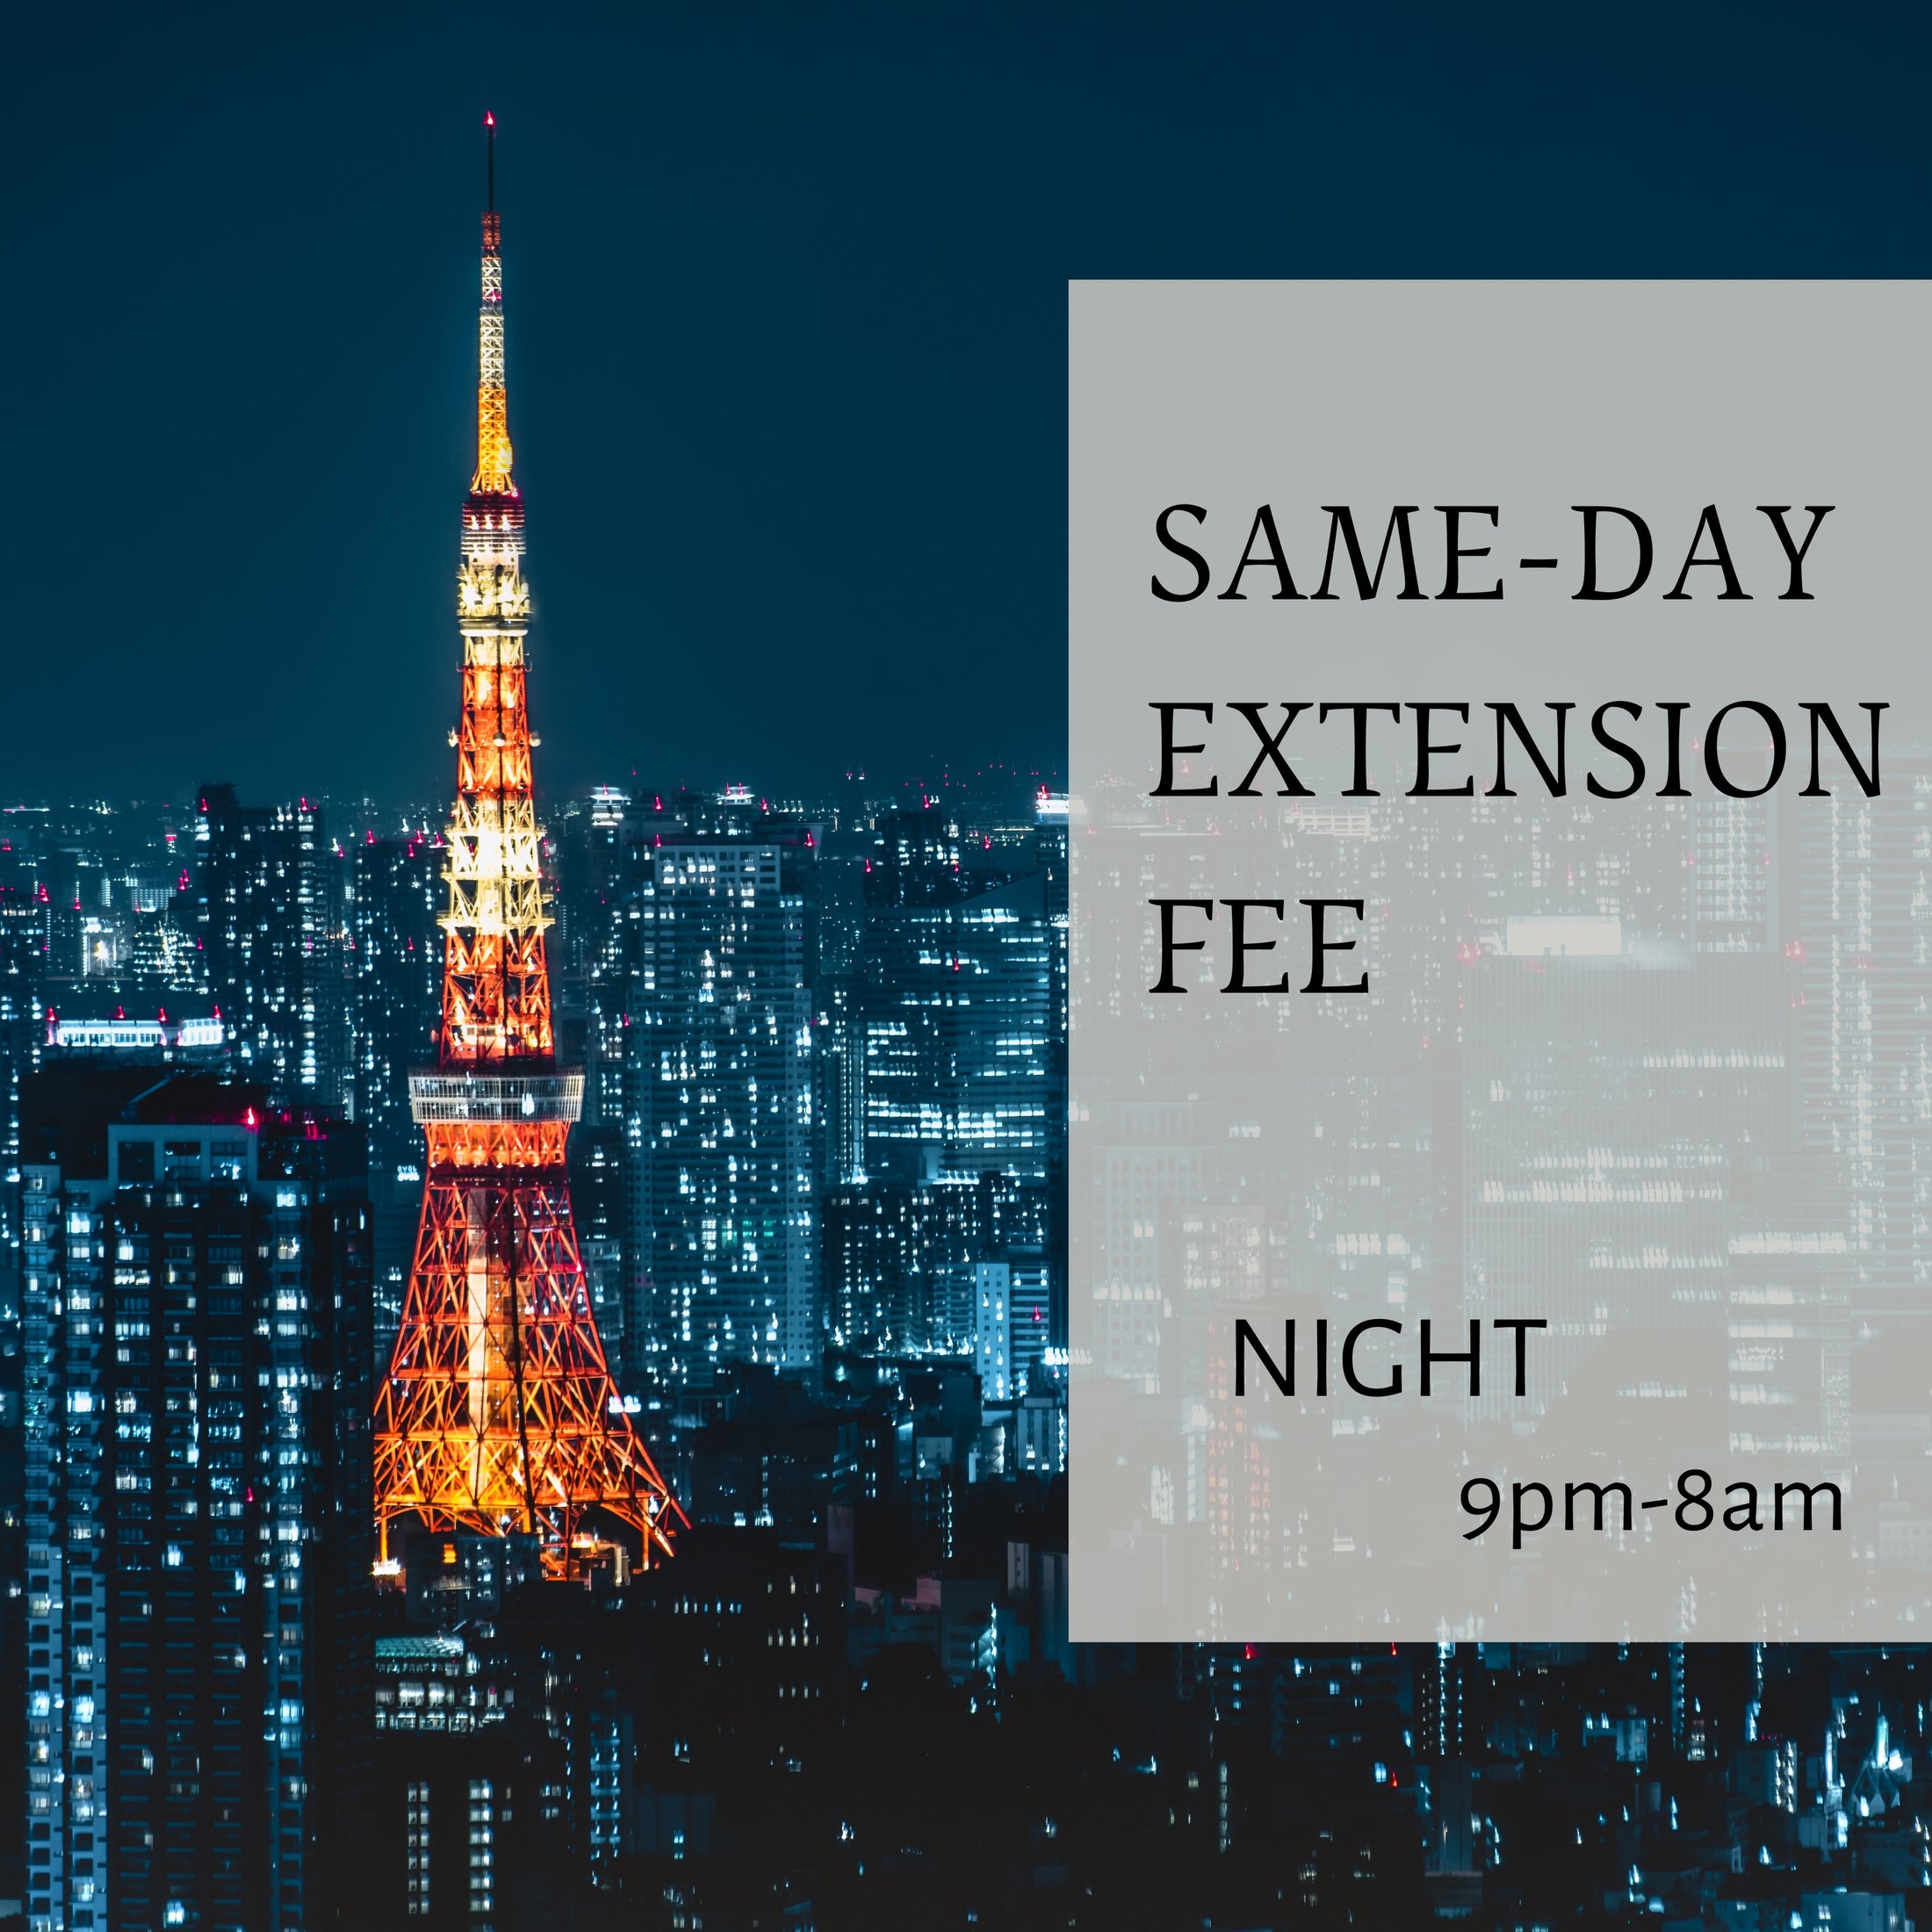 ◇Same Day Extension Fee (9PM - 8AM)